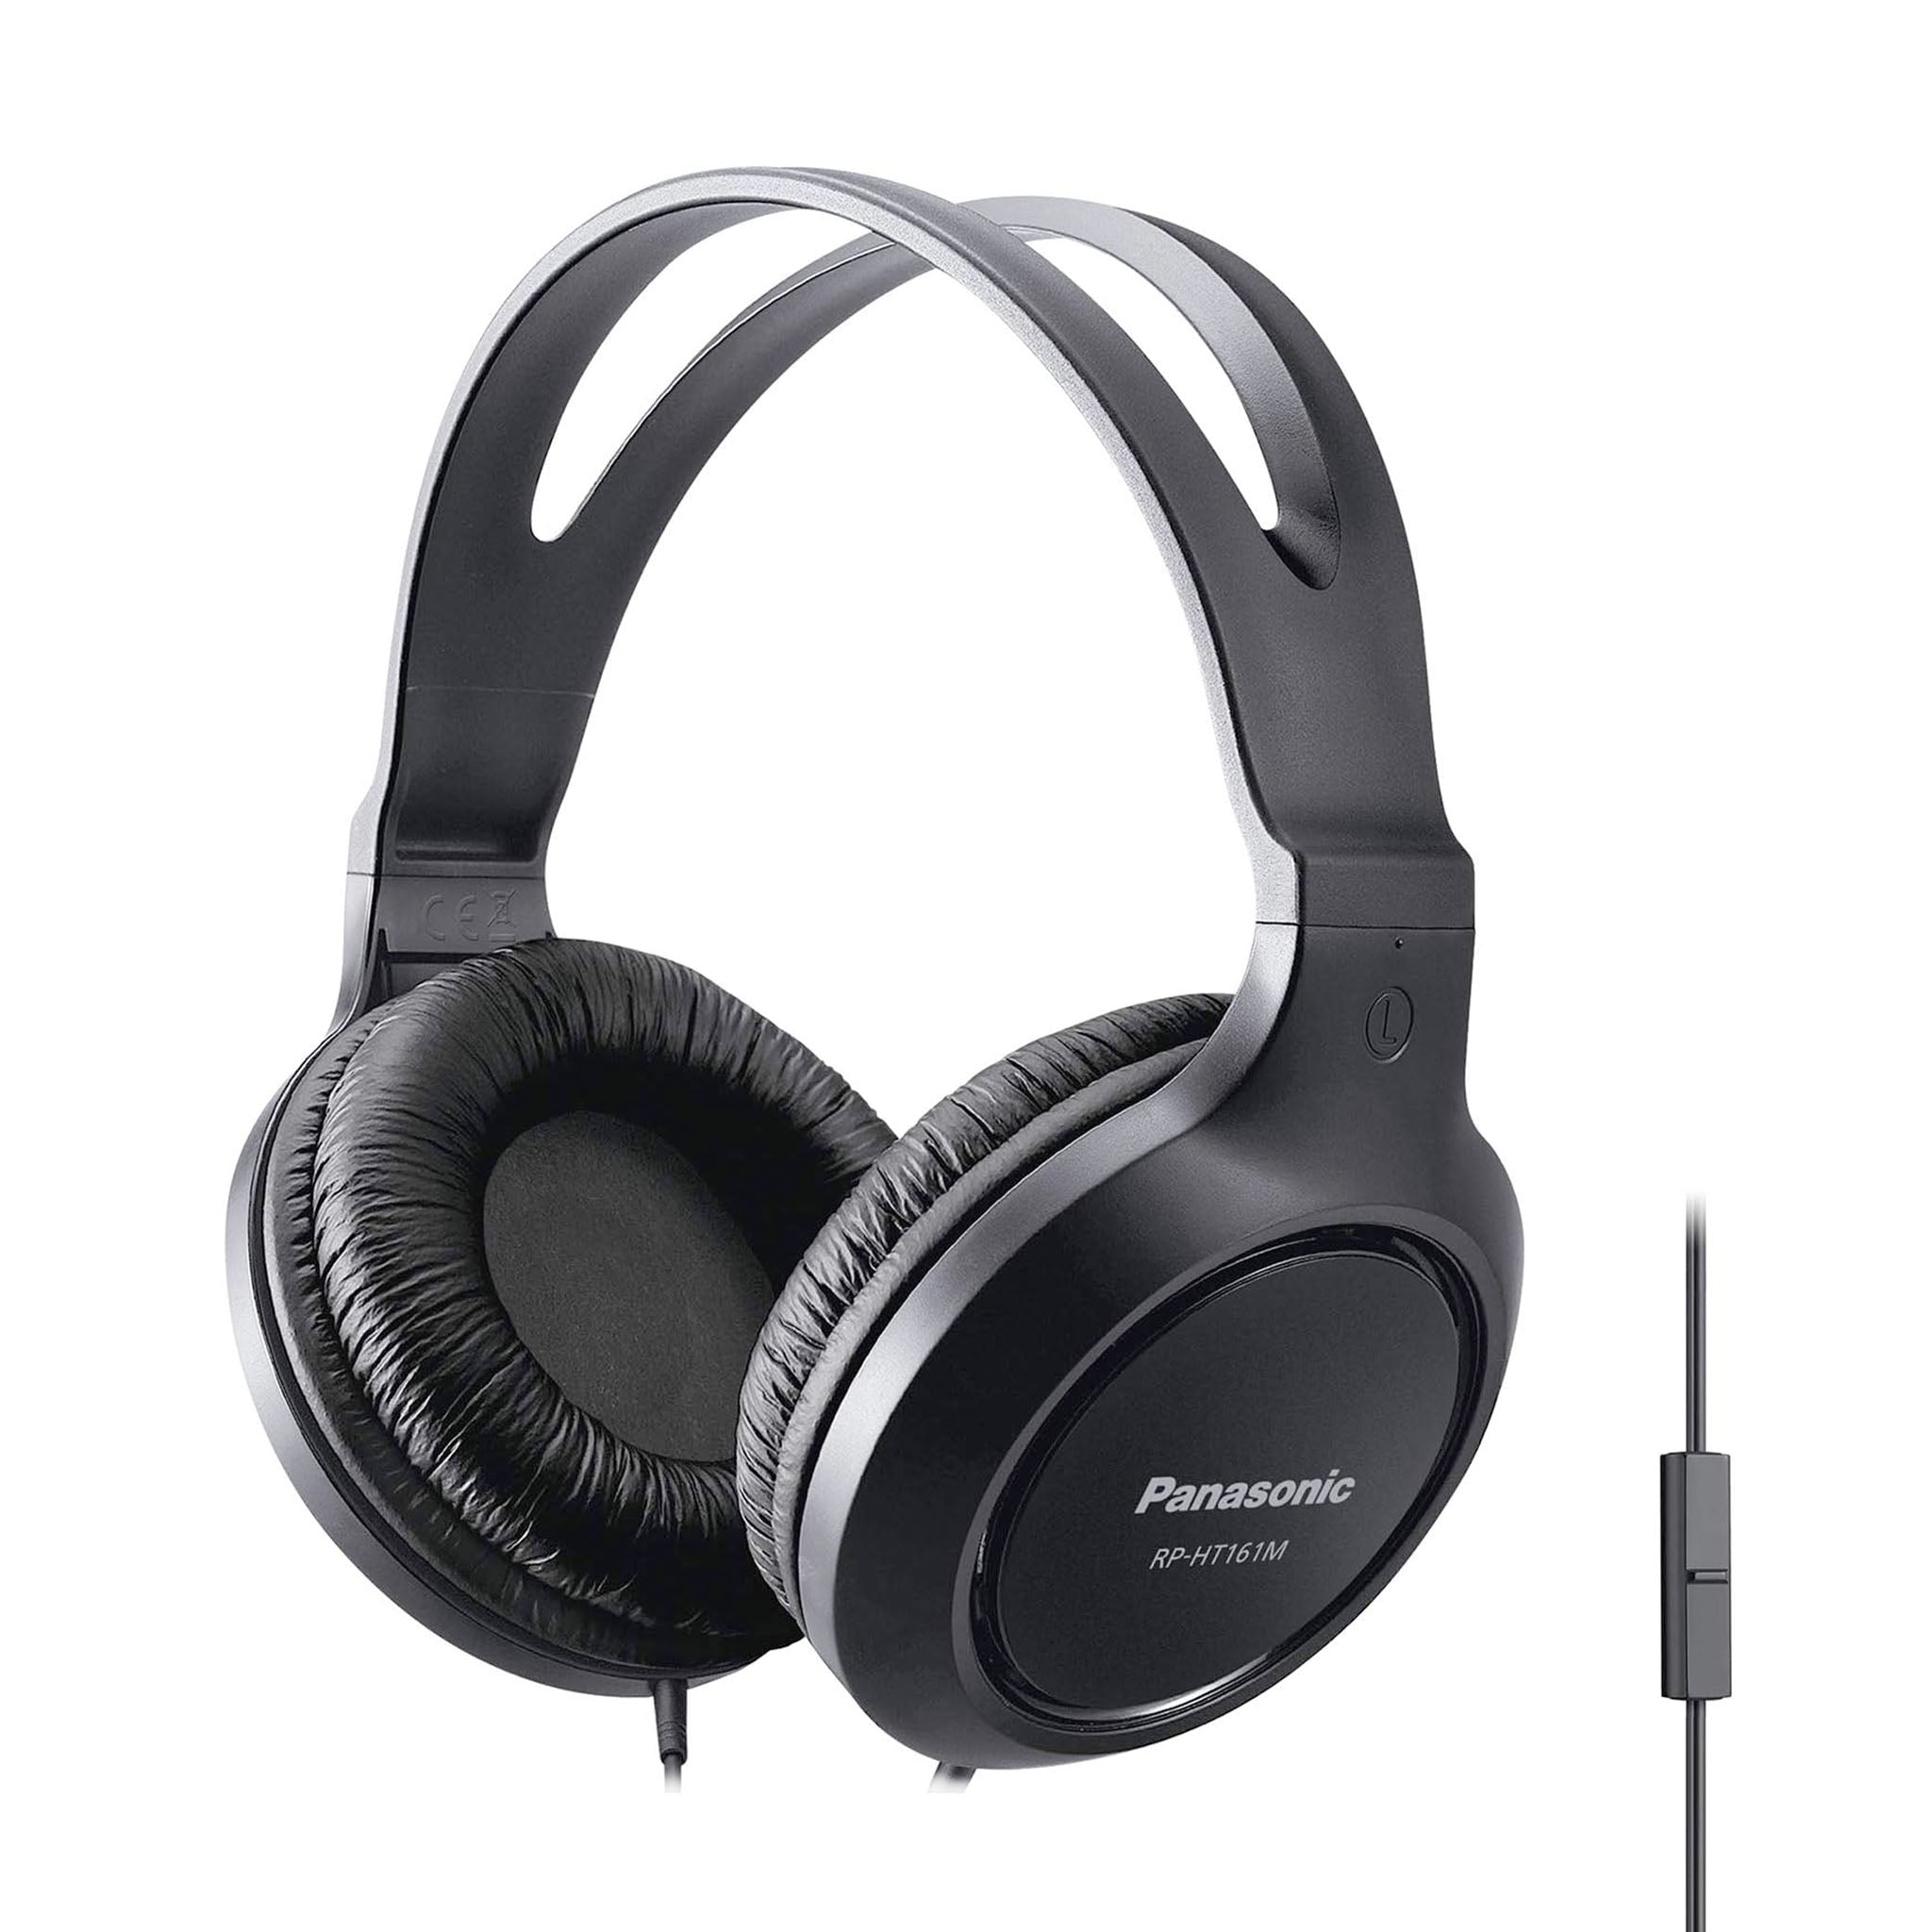  Panasonic SoundSlayer Final Fantasy XIV Online Edition Wearable  Gaming Speaker, Lightweight Wired Neck Speaker with Built-in Microphone and  Dimensional Sound - SC-GN01PPFF (Black) : Electronics